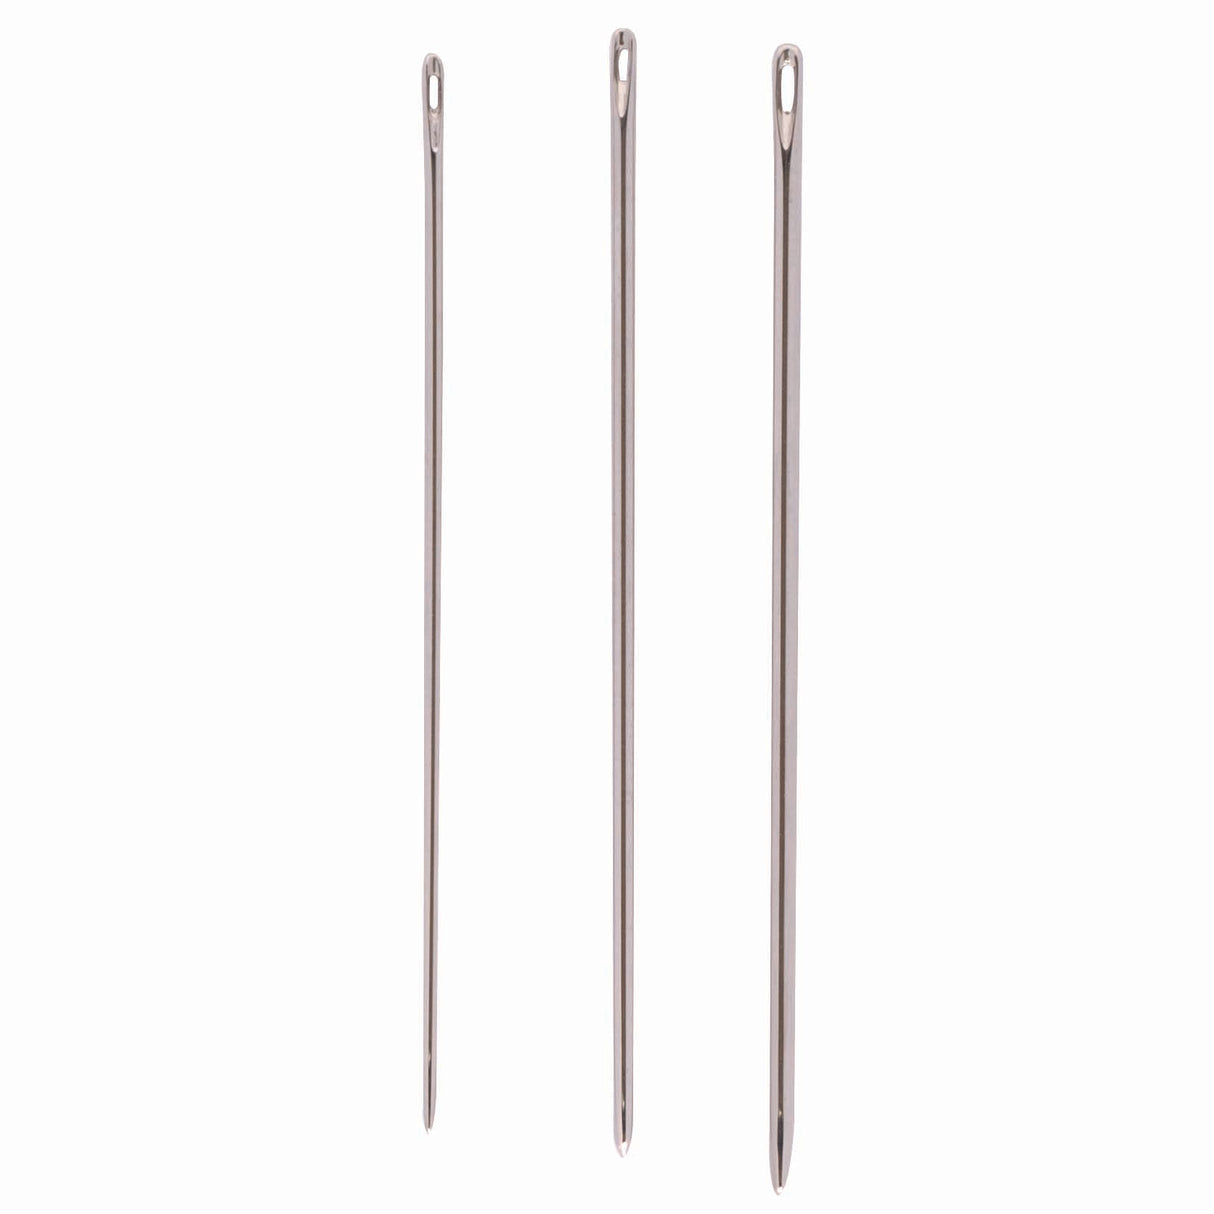 14 Hand Sewing Needle Triangular Point